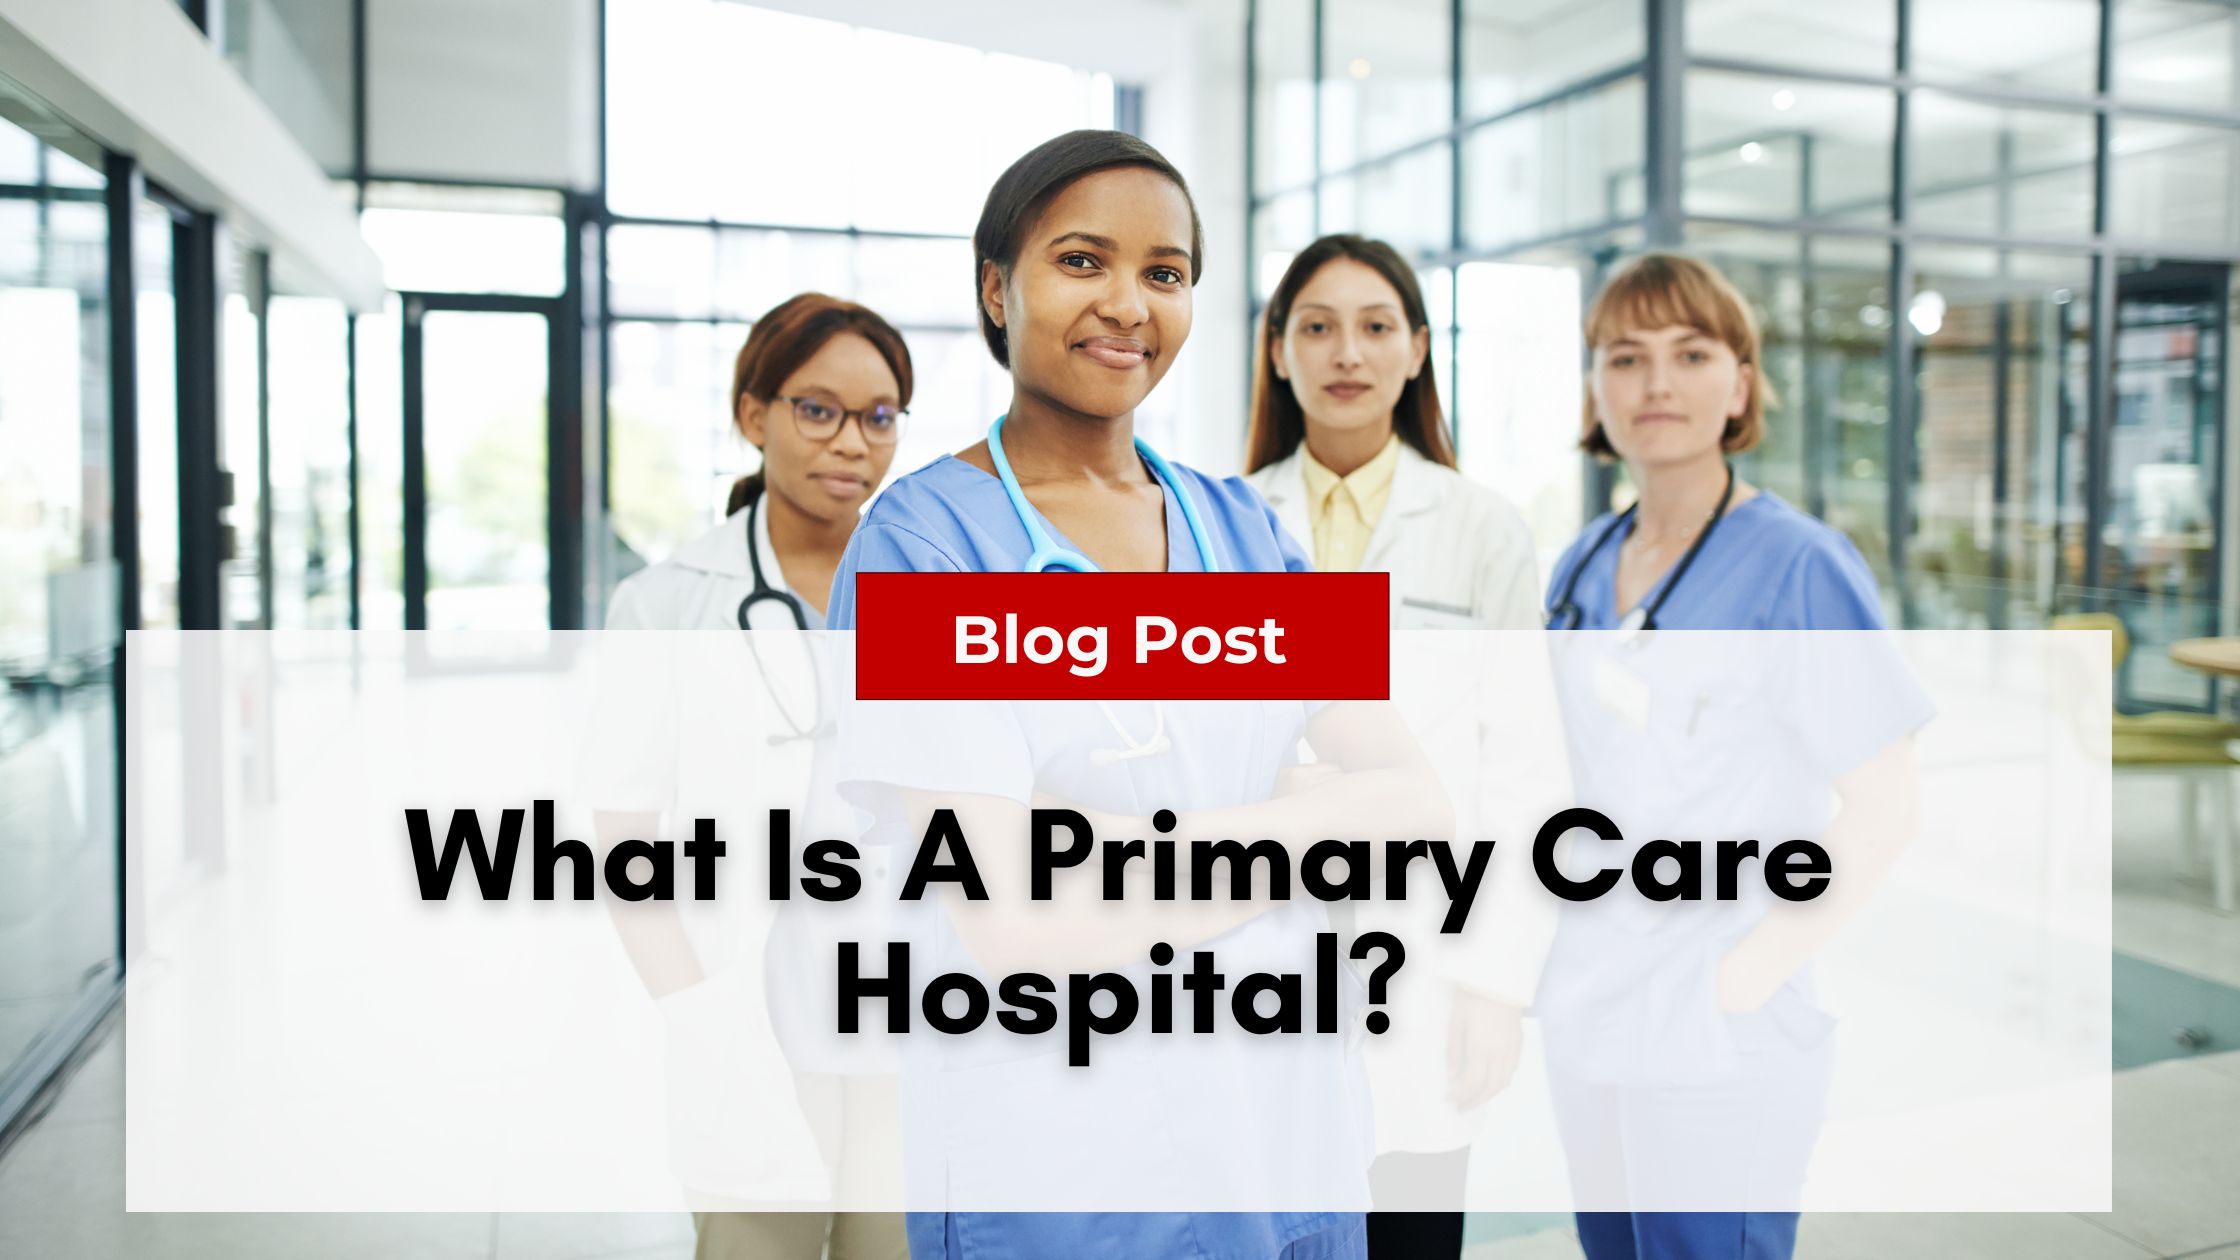 Four healthcare professionals in blue and white uniforms stand in a medical facility, centered behind a "Blog Post" heading and the text "What Is A Primary Care Hospital?" Learn about primary care hospitals and how they address issues like Nurse Practitioner Burnout.